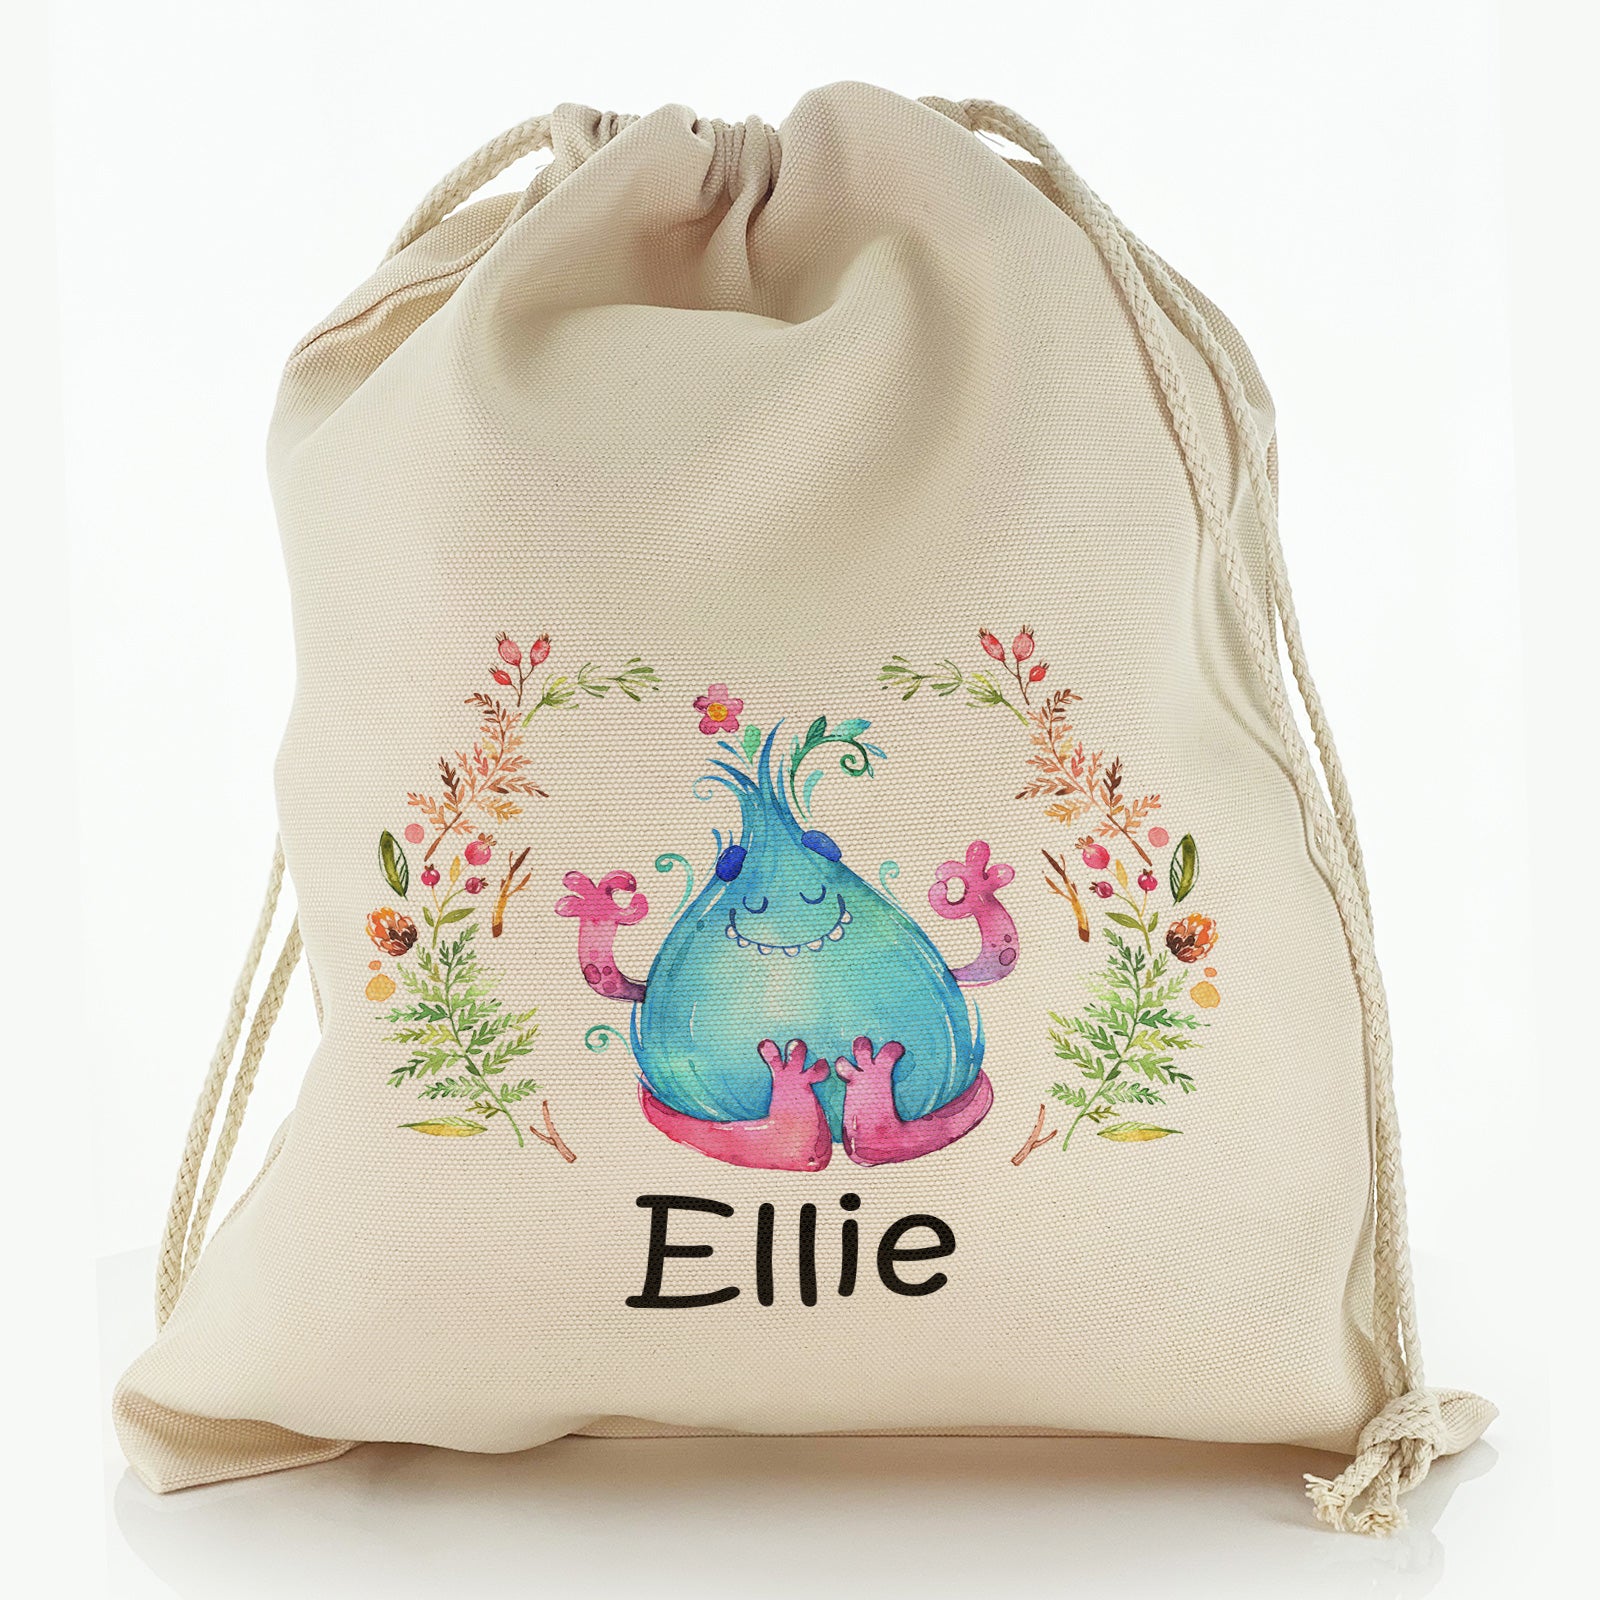 Personalised Canvas Sack with Childish Text and Flowered Blue Flame Monster